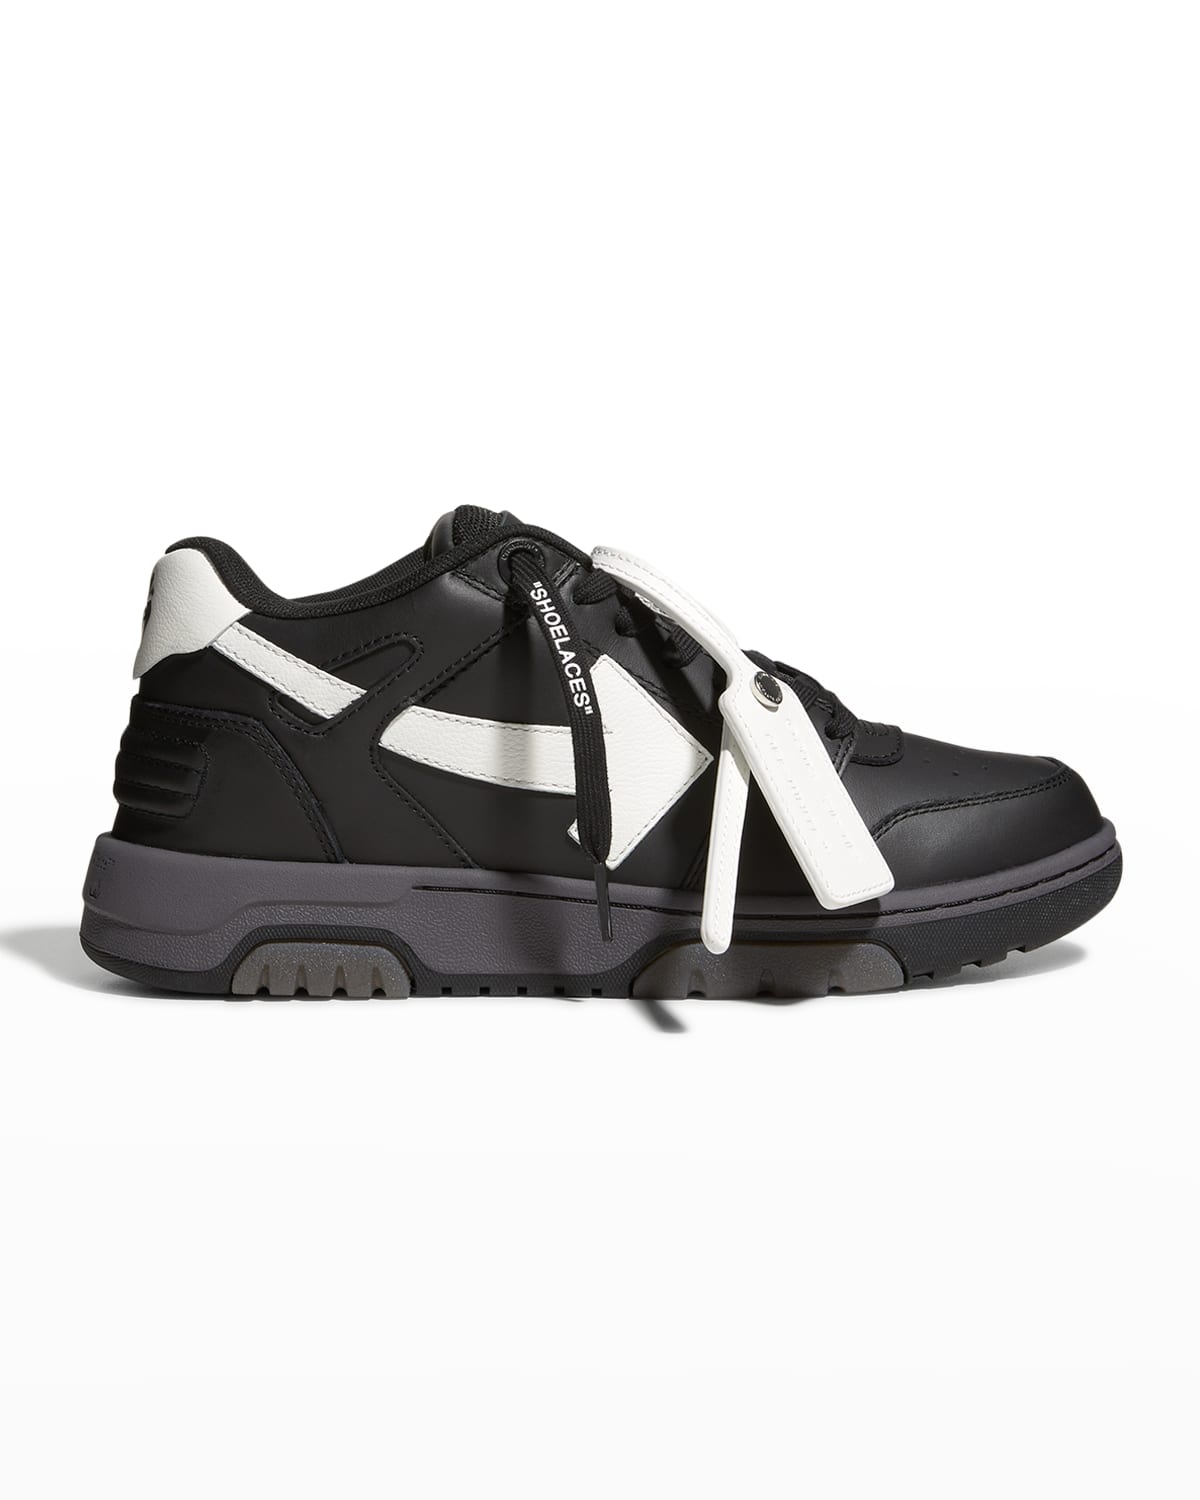 Off-White Out Of Office Bicolor Sneakers | Neiman Marcus